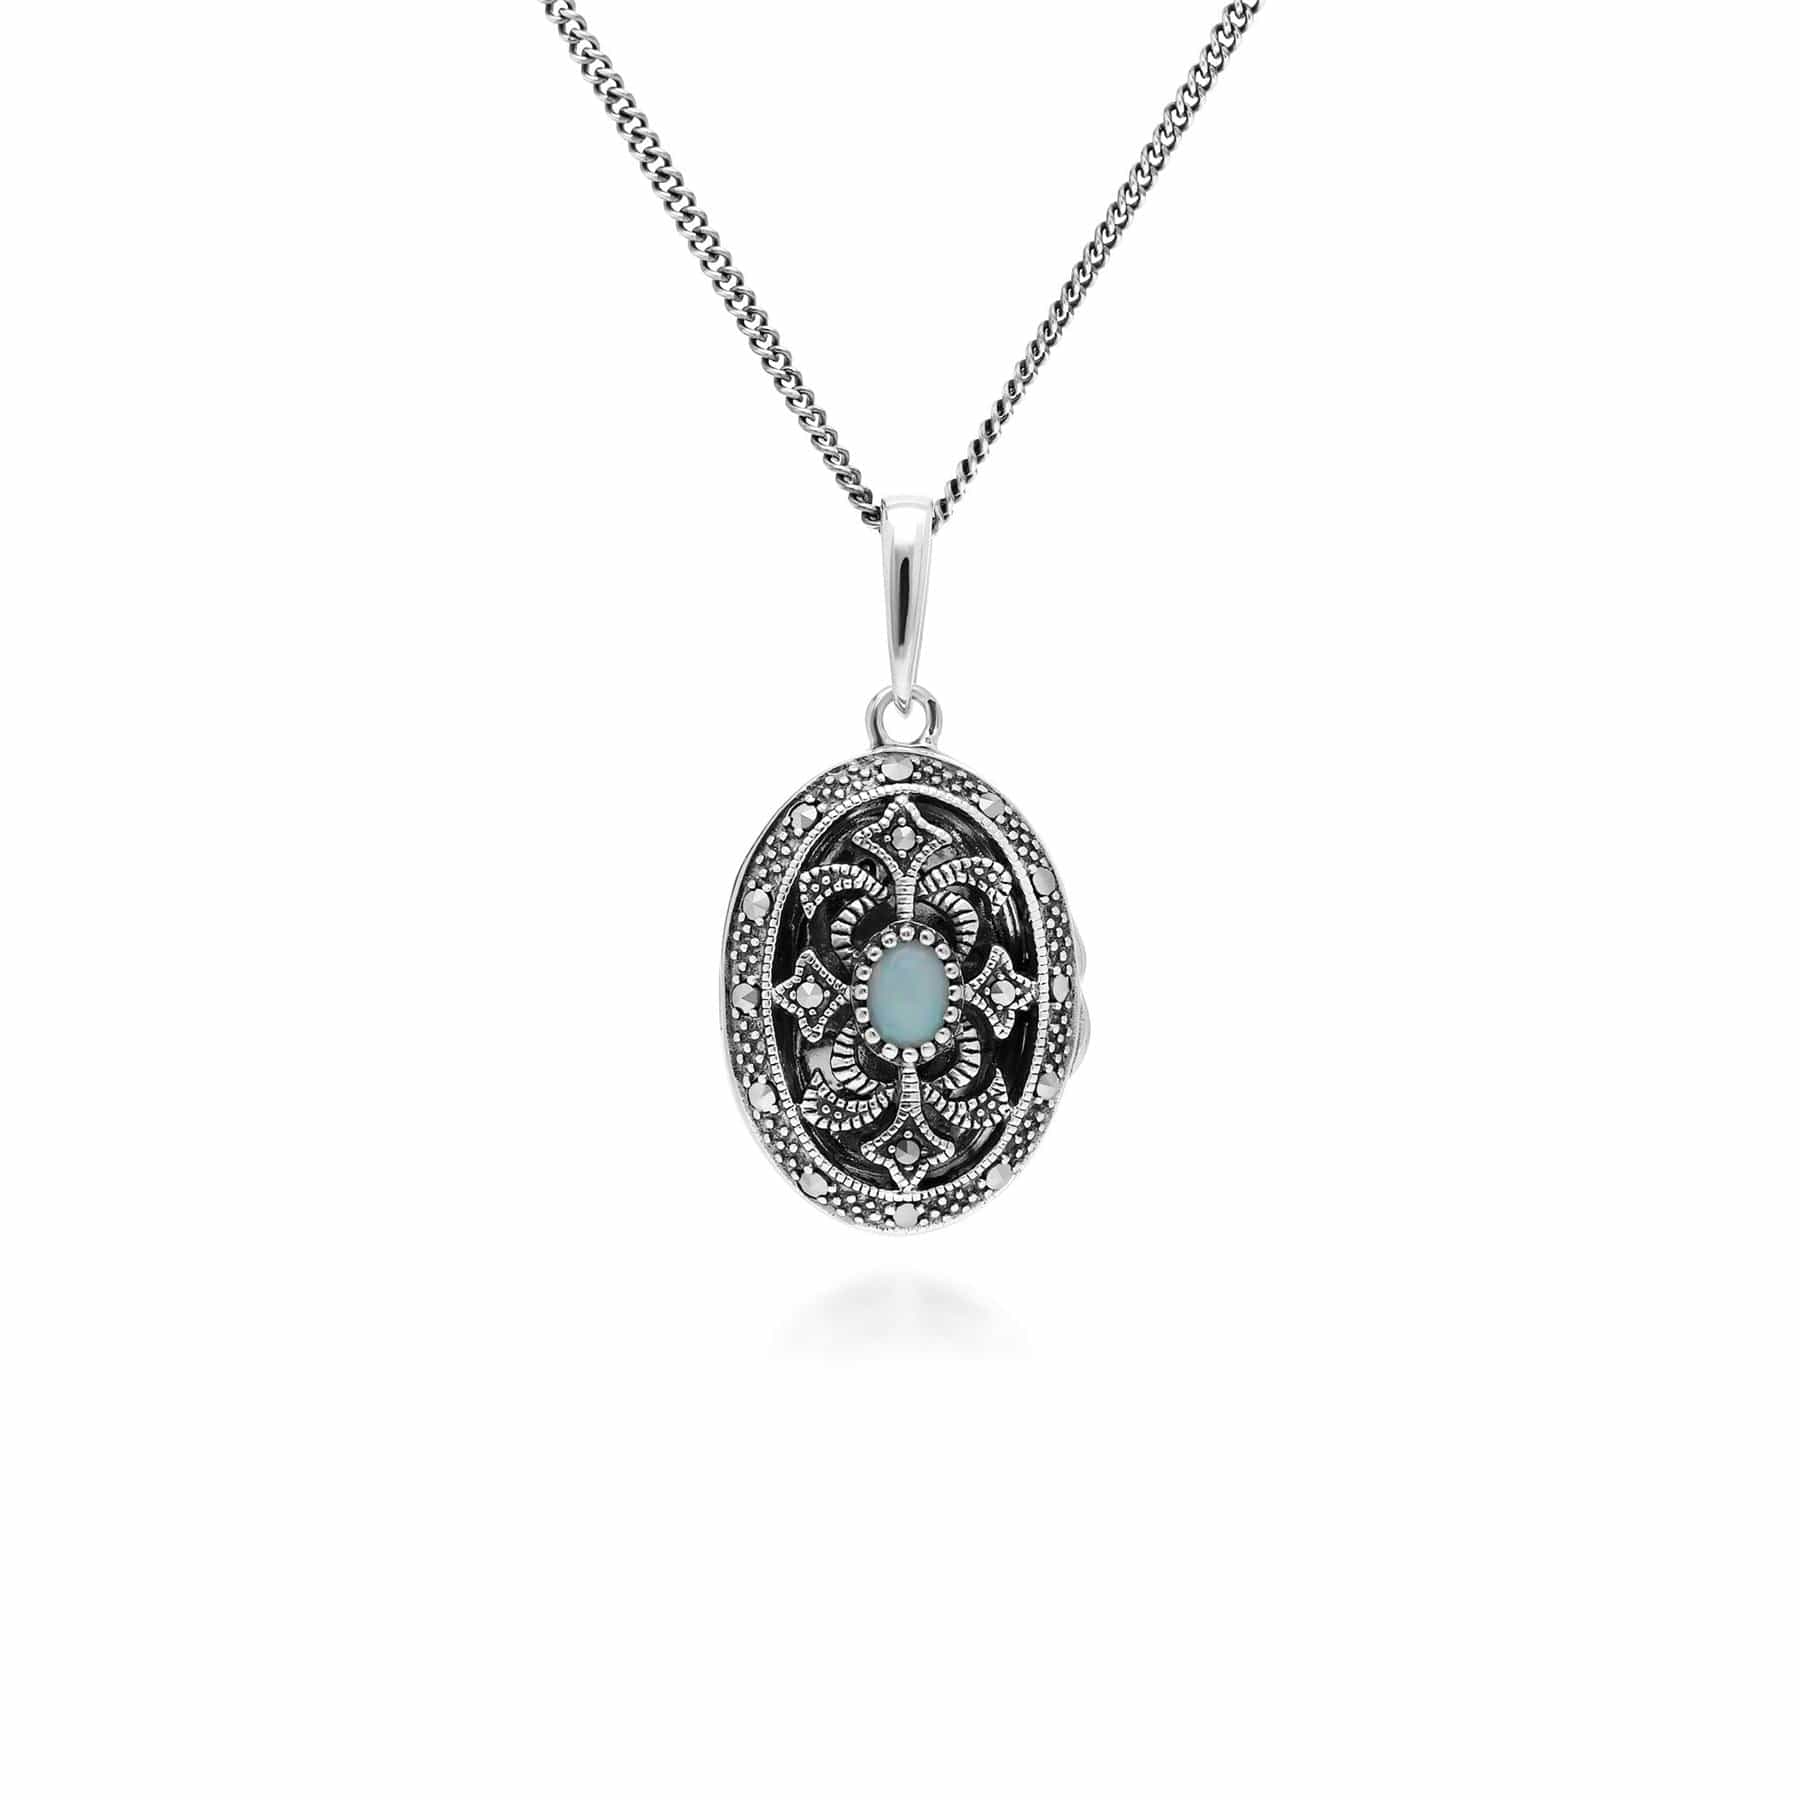 Image of Art Nouveau Style Oval Opal & Marcasite Locket Necklace in 925 Sterling Silver